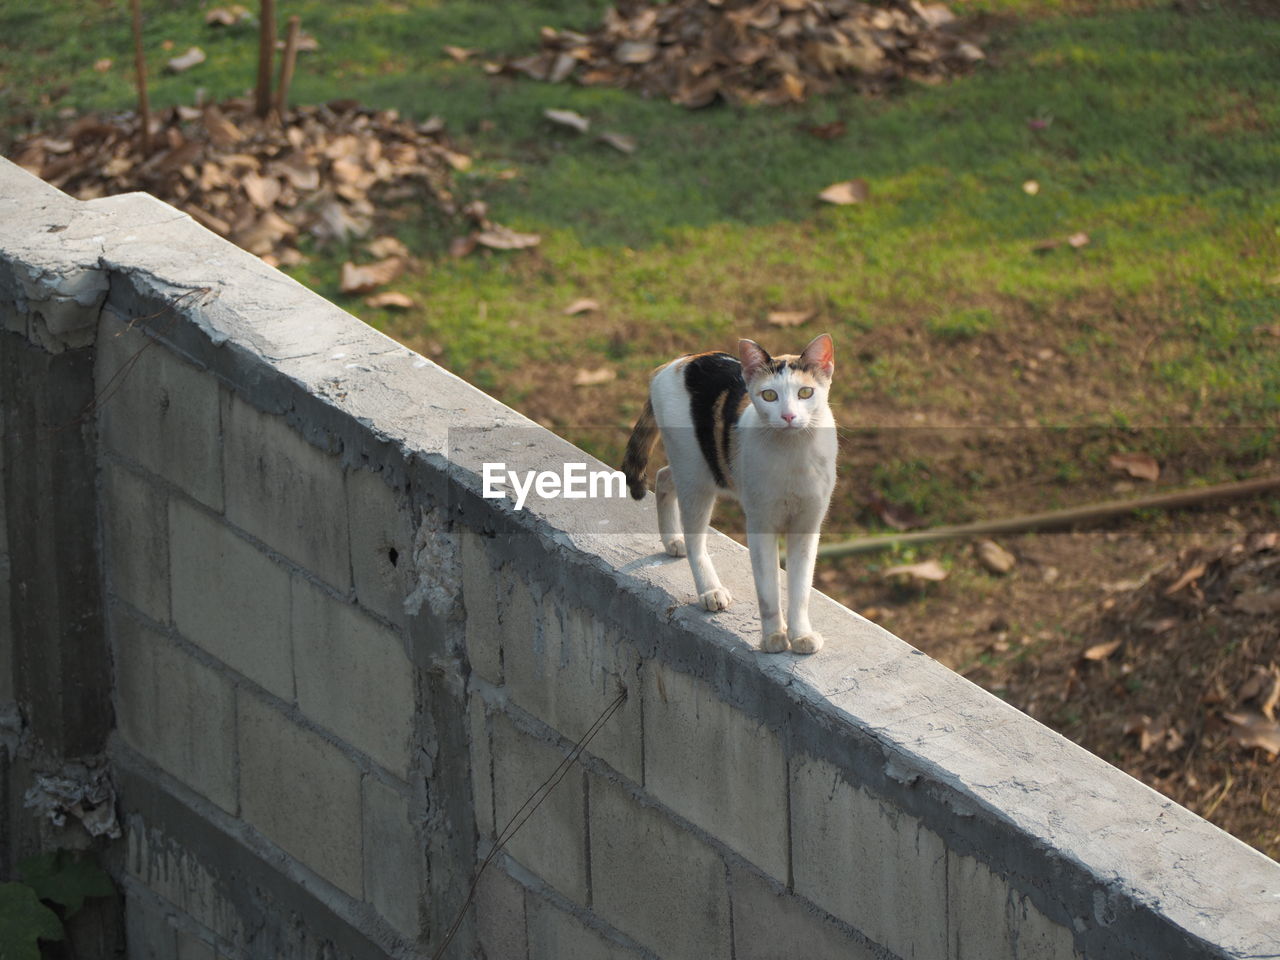 HIGH ANGLE PORTRAIT OF A CAT STANDING ON WALL